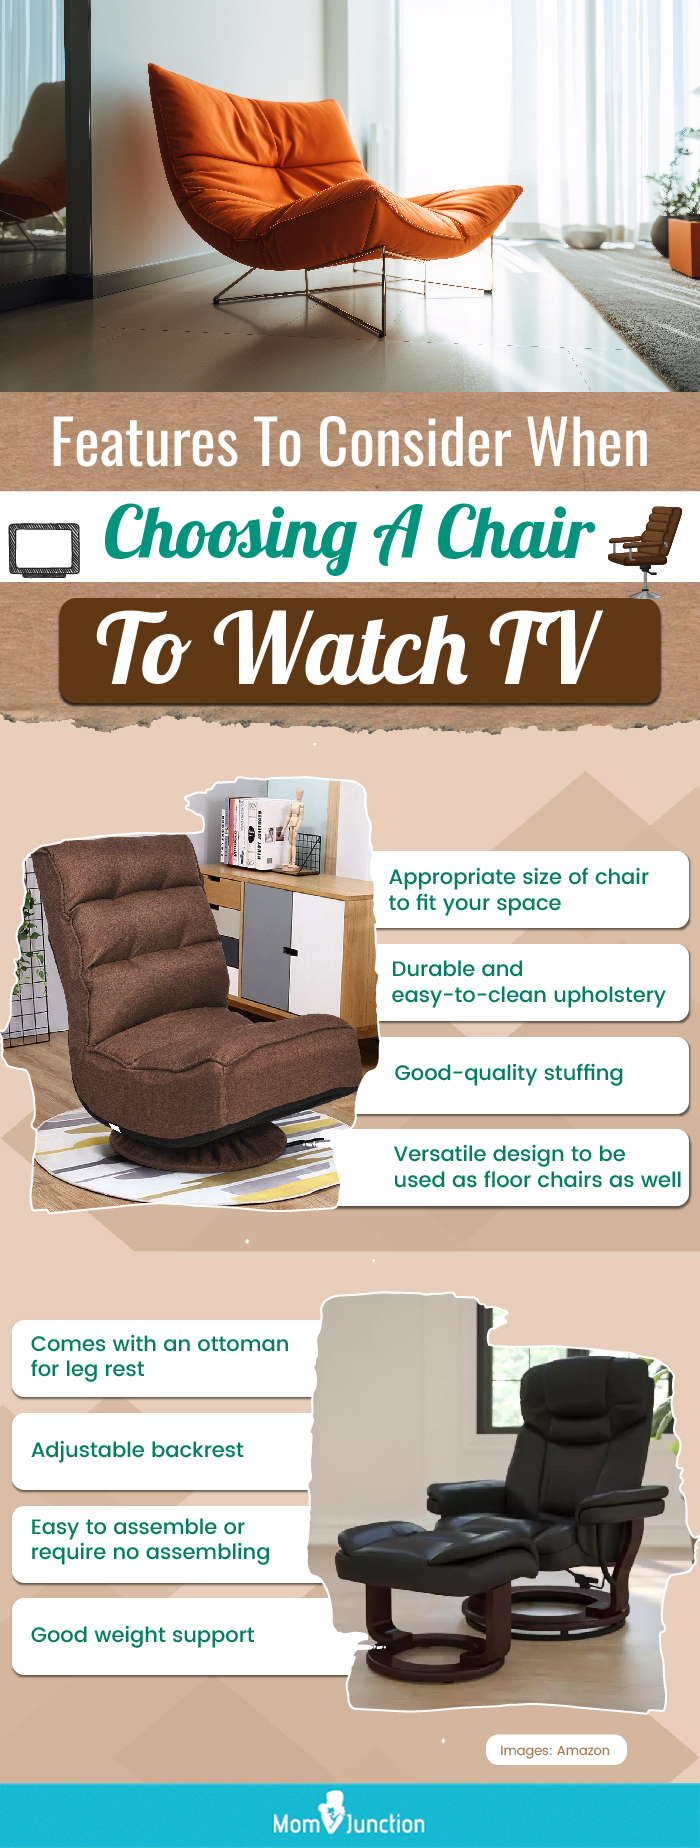 https://www.momjunction.com/wp-content/uploads/2020/07/Features-To-Consider-When-Choosing-A-Chair-To-Watch-TV.jpg